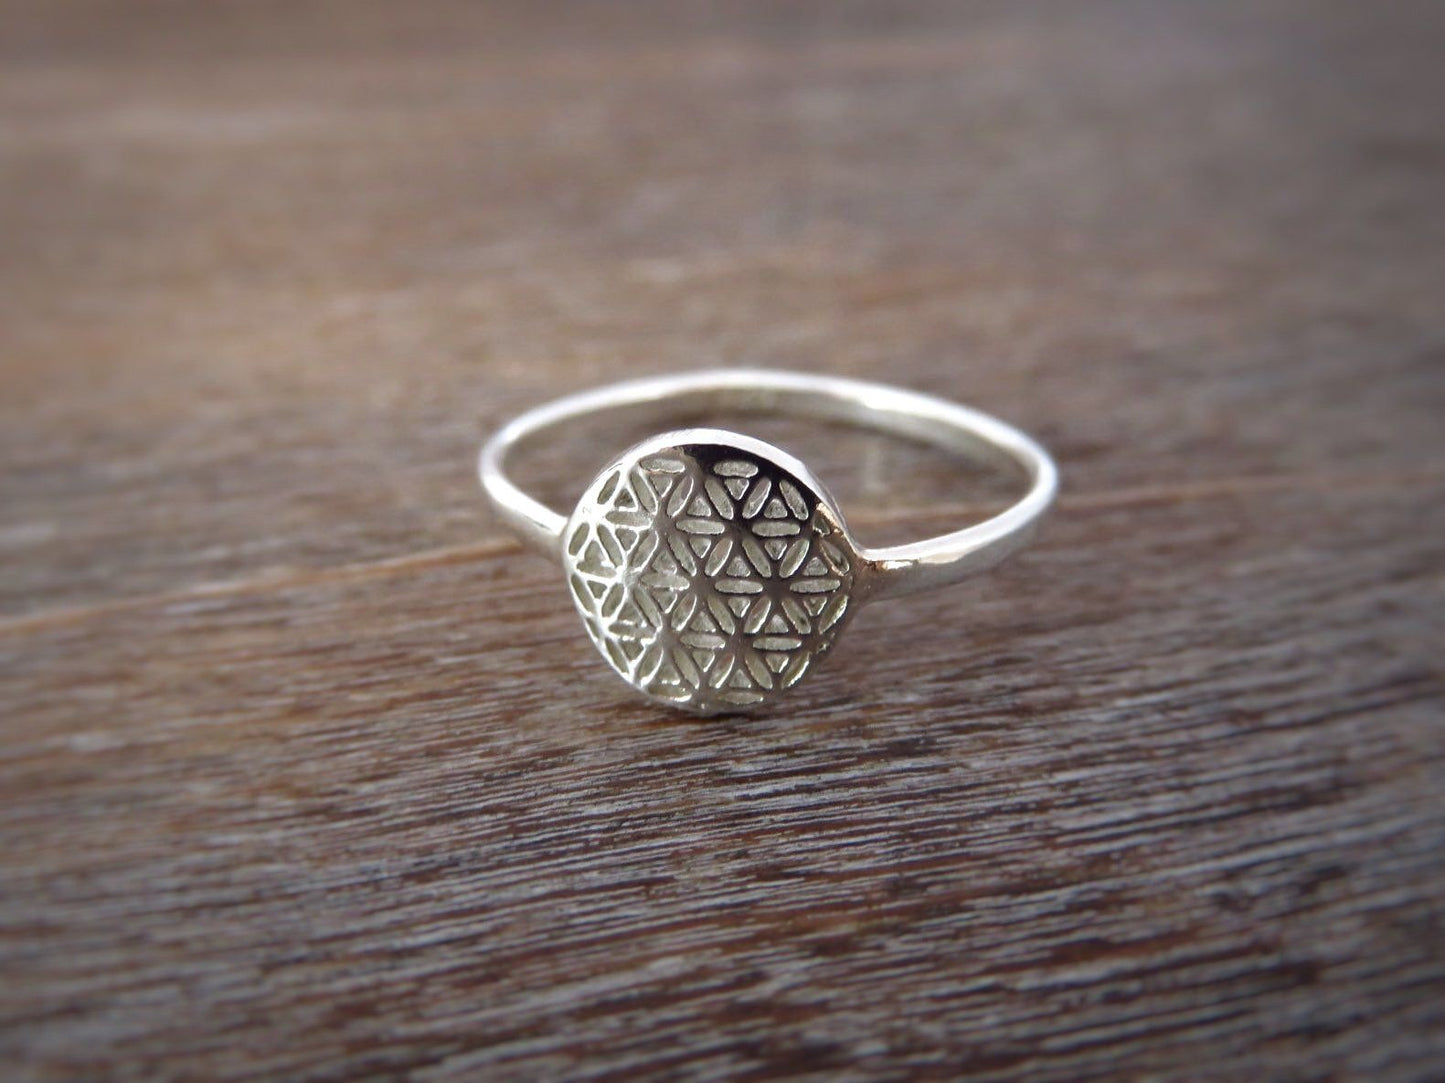 Ring with the motif of the flower of life made of silver 